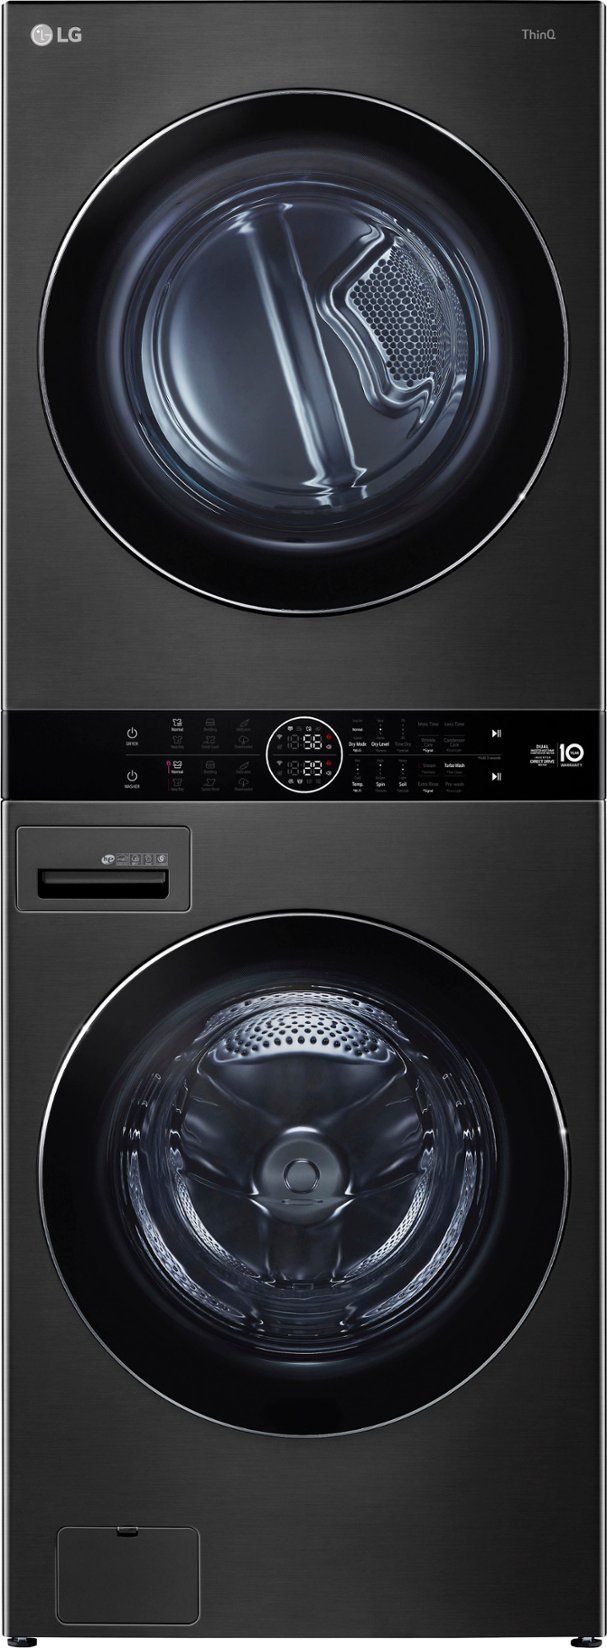 LG 4.5 Cu. Ft. HE Smart Front Load Washer & 7.4 Cu. Ft. Electric Dryer WashTower w/ Steam & Ventless Dryer $1,200 + Free Store Pickup at Best Buy or $29.99 Delivery